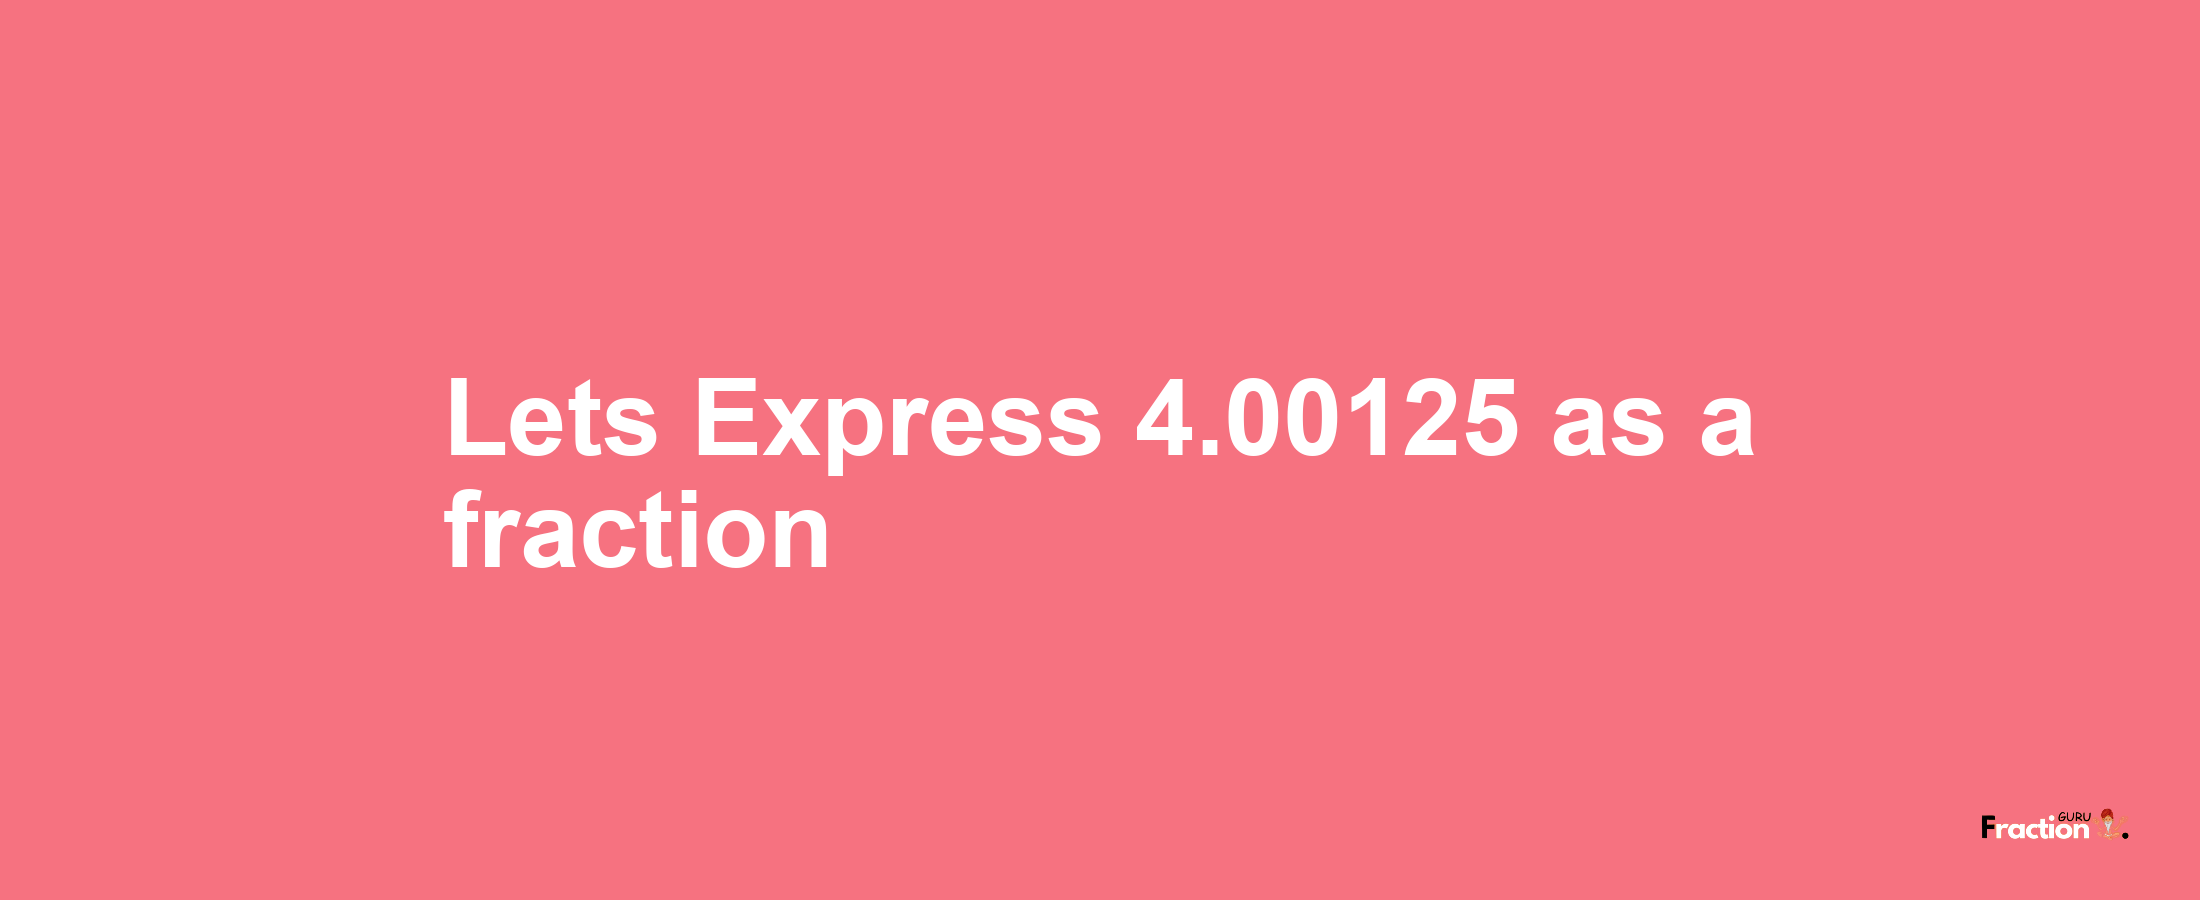 Lets Express 4.00125 as afraction